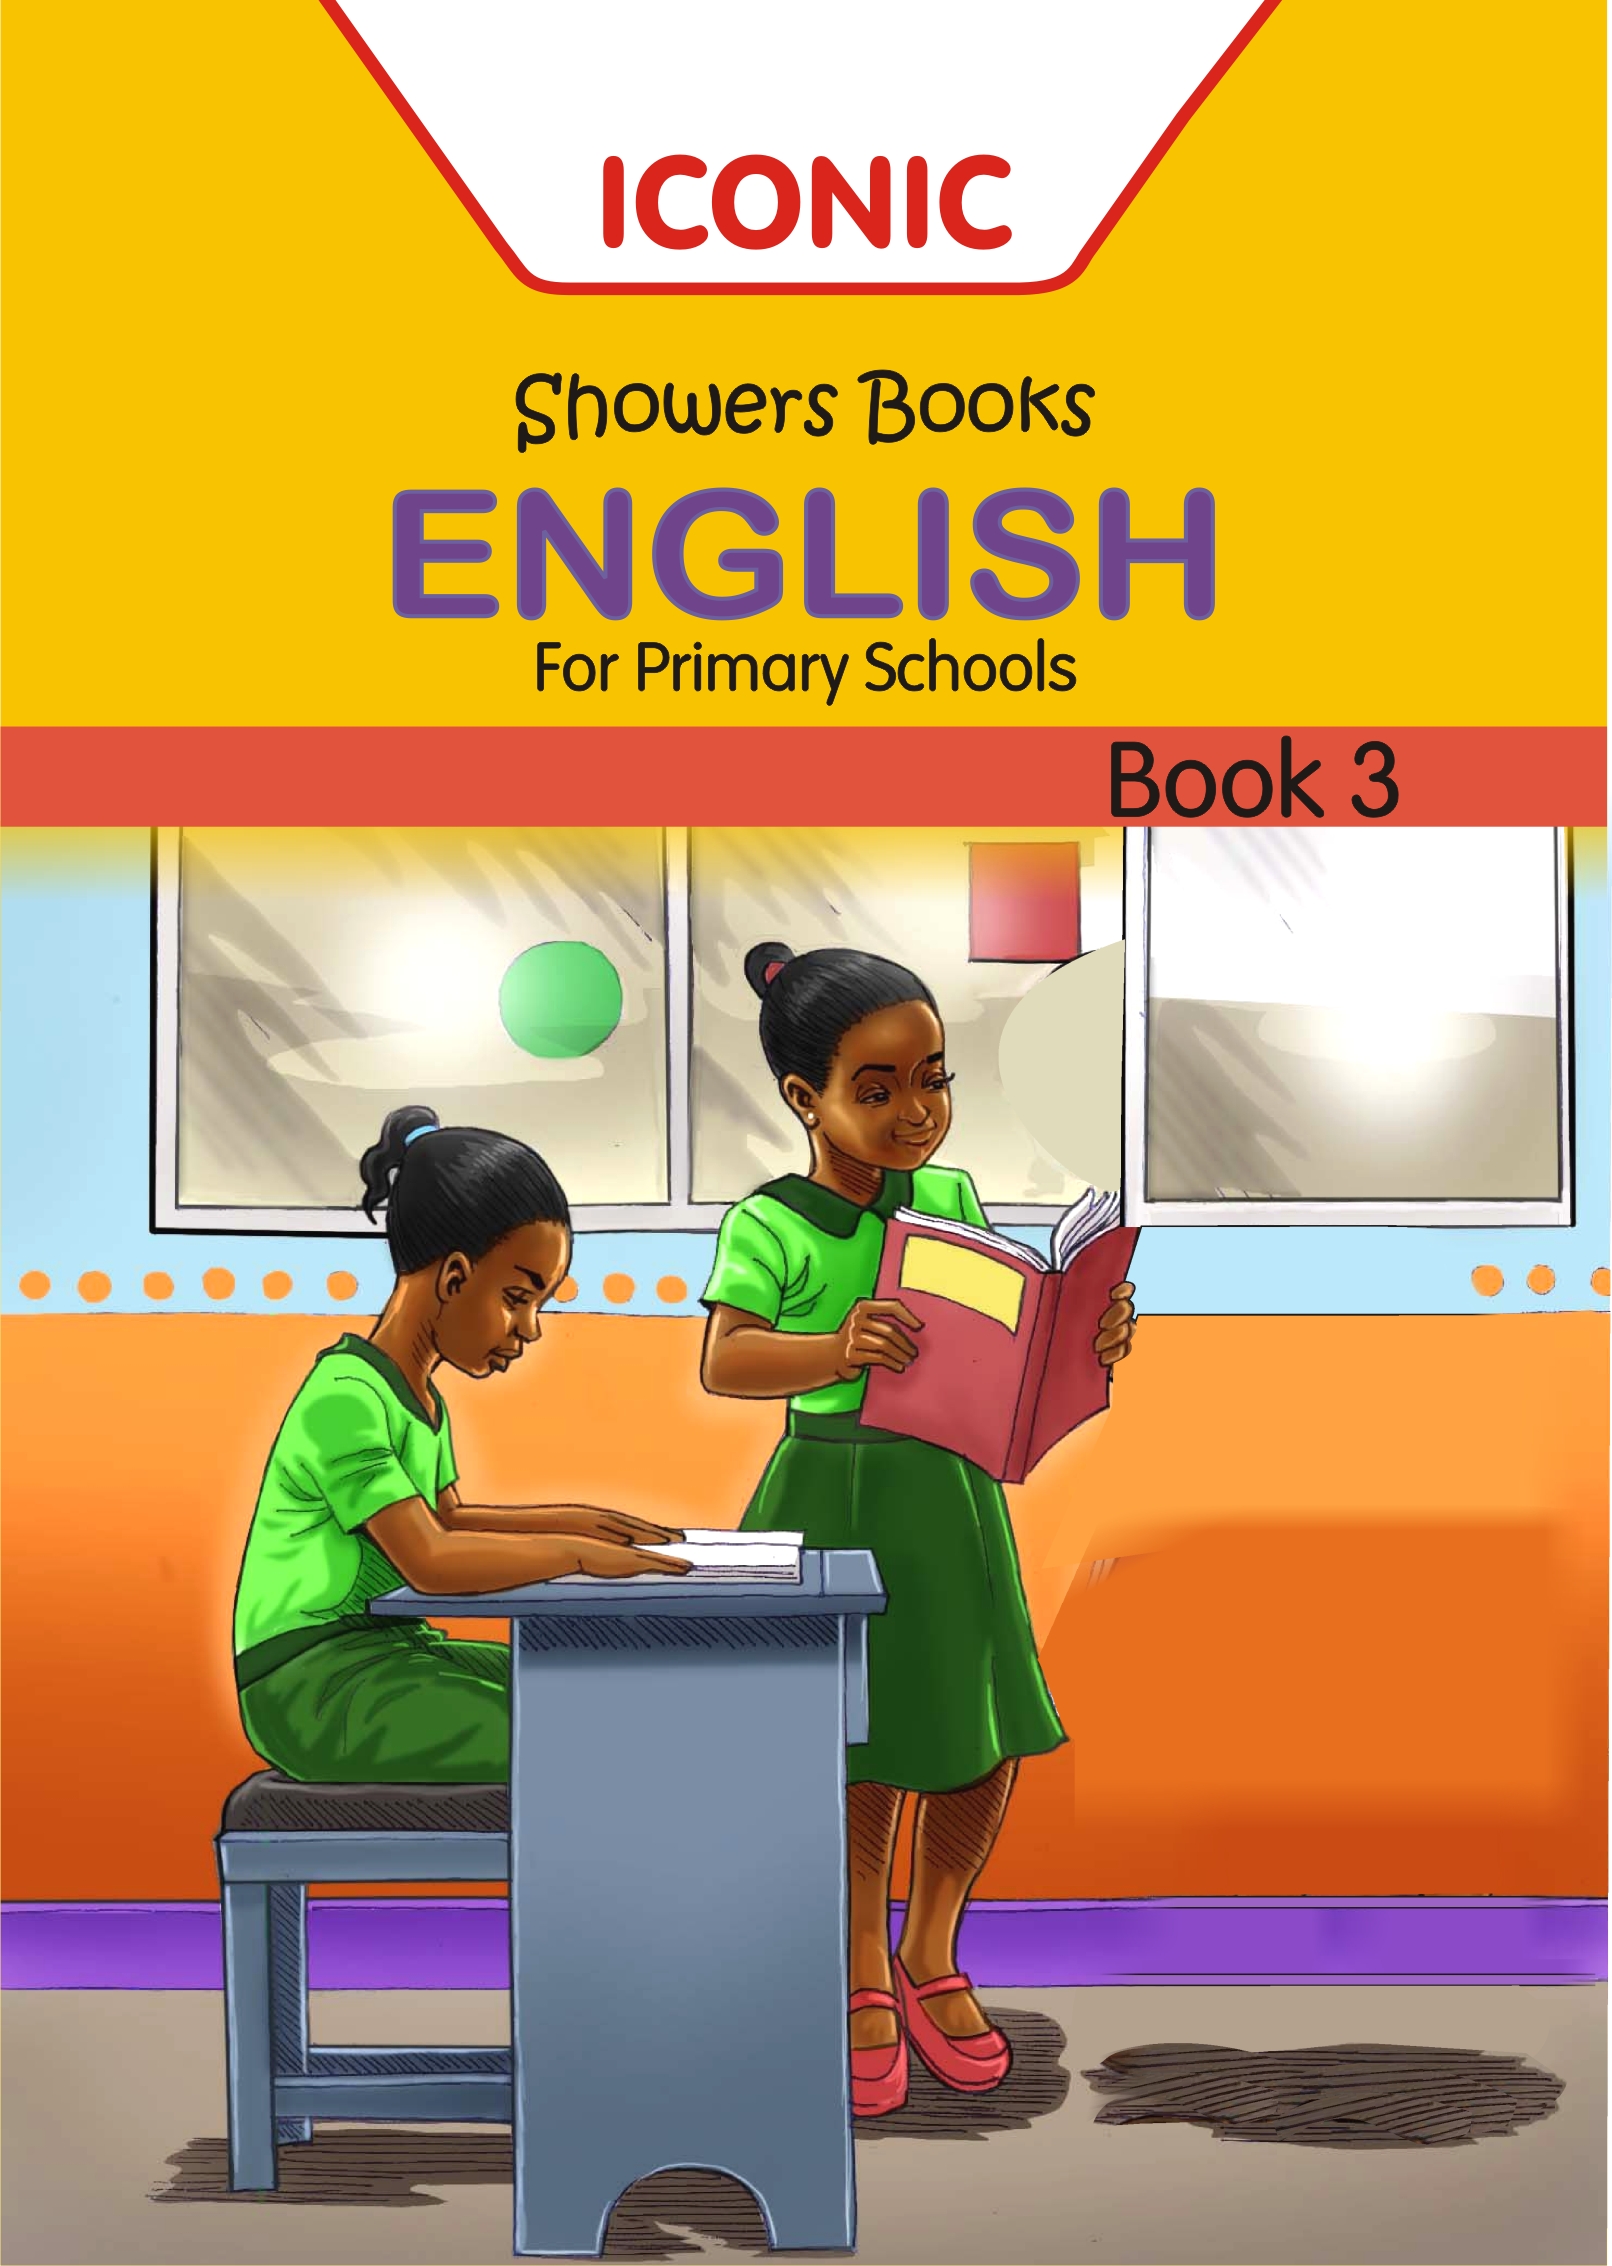 iconic-english-for-primary-schools-book-3-showers-publishers